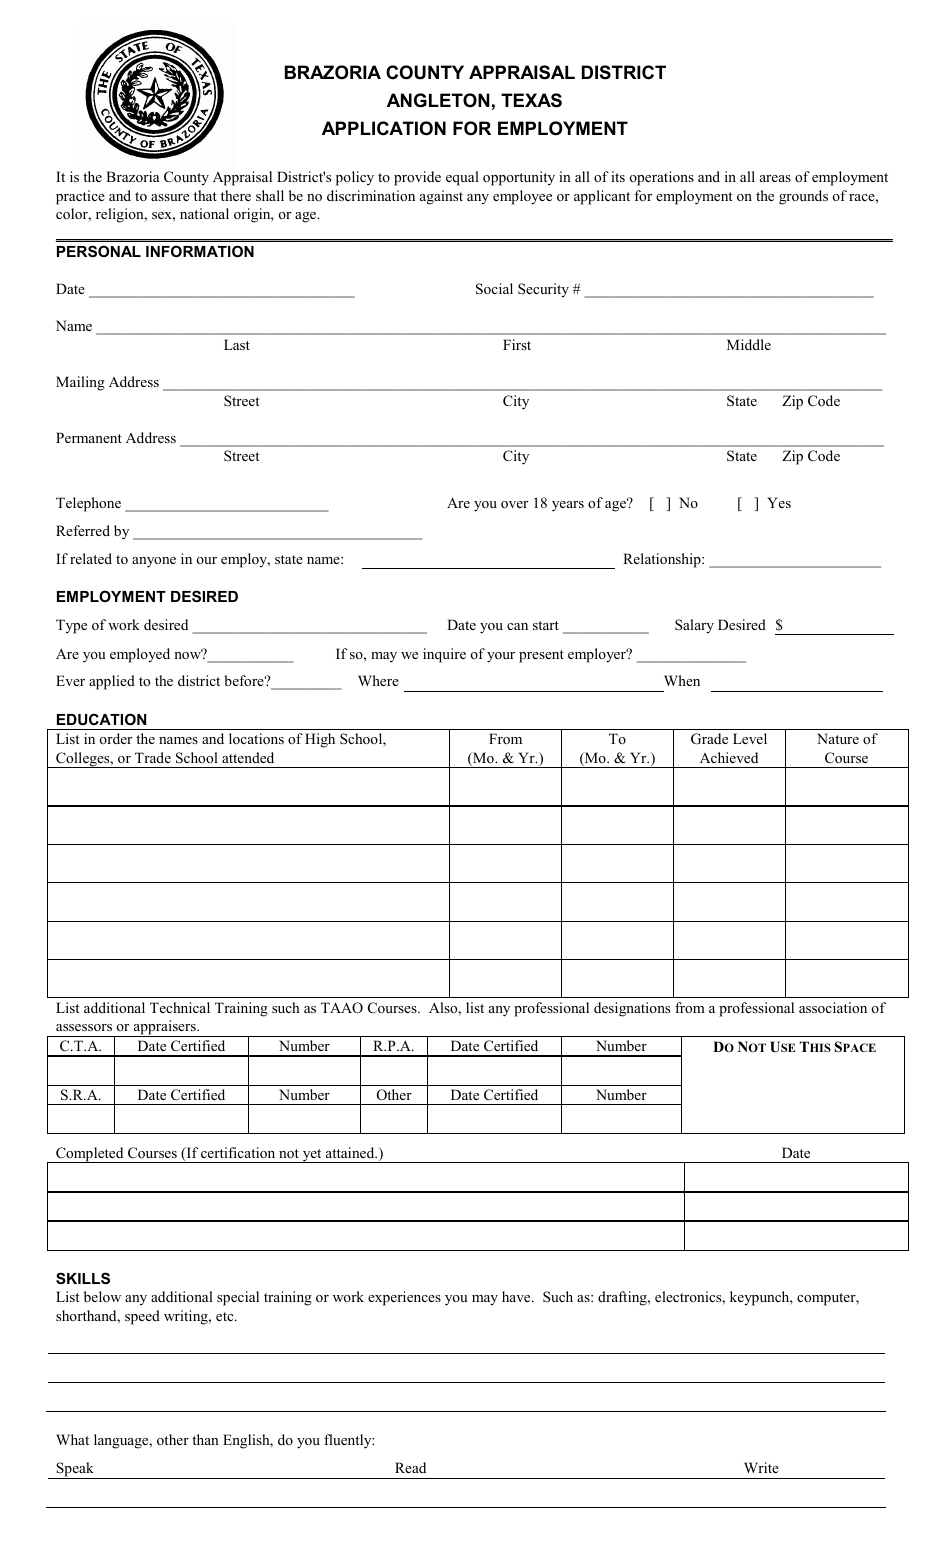 Application for Employment - Brazoria County, Texas, Page 1